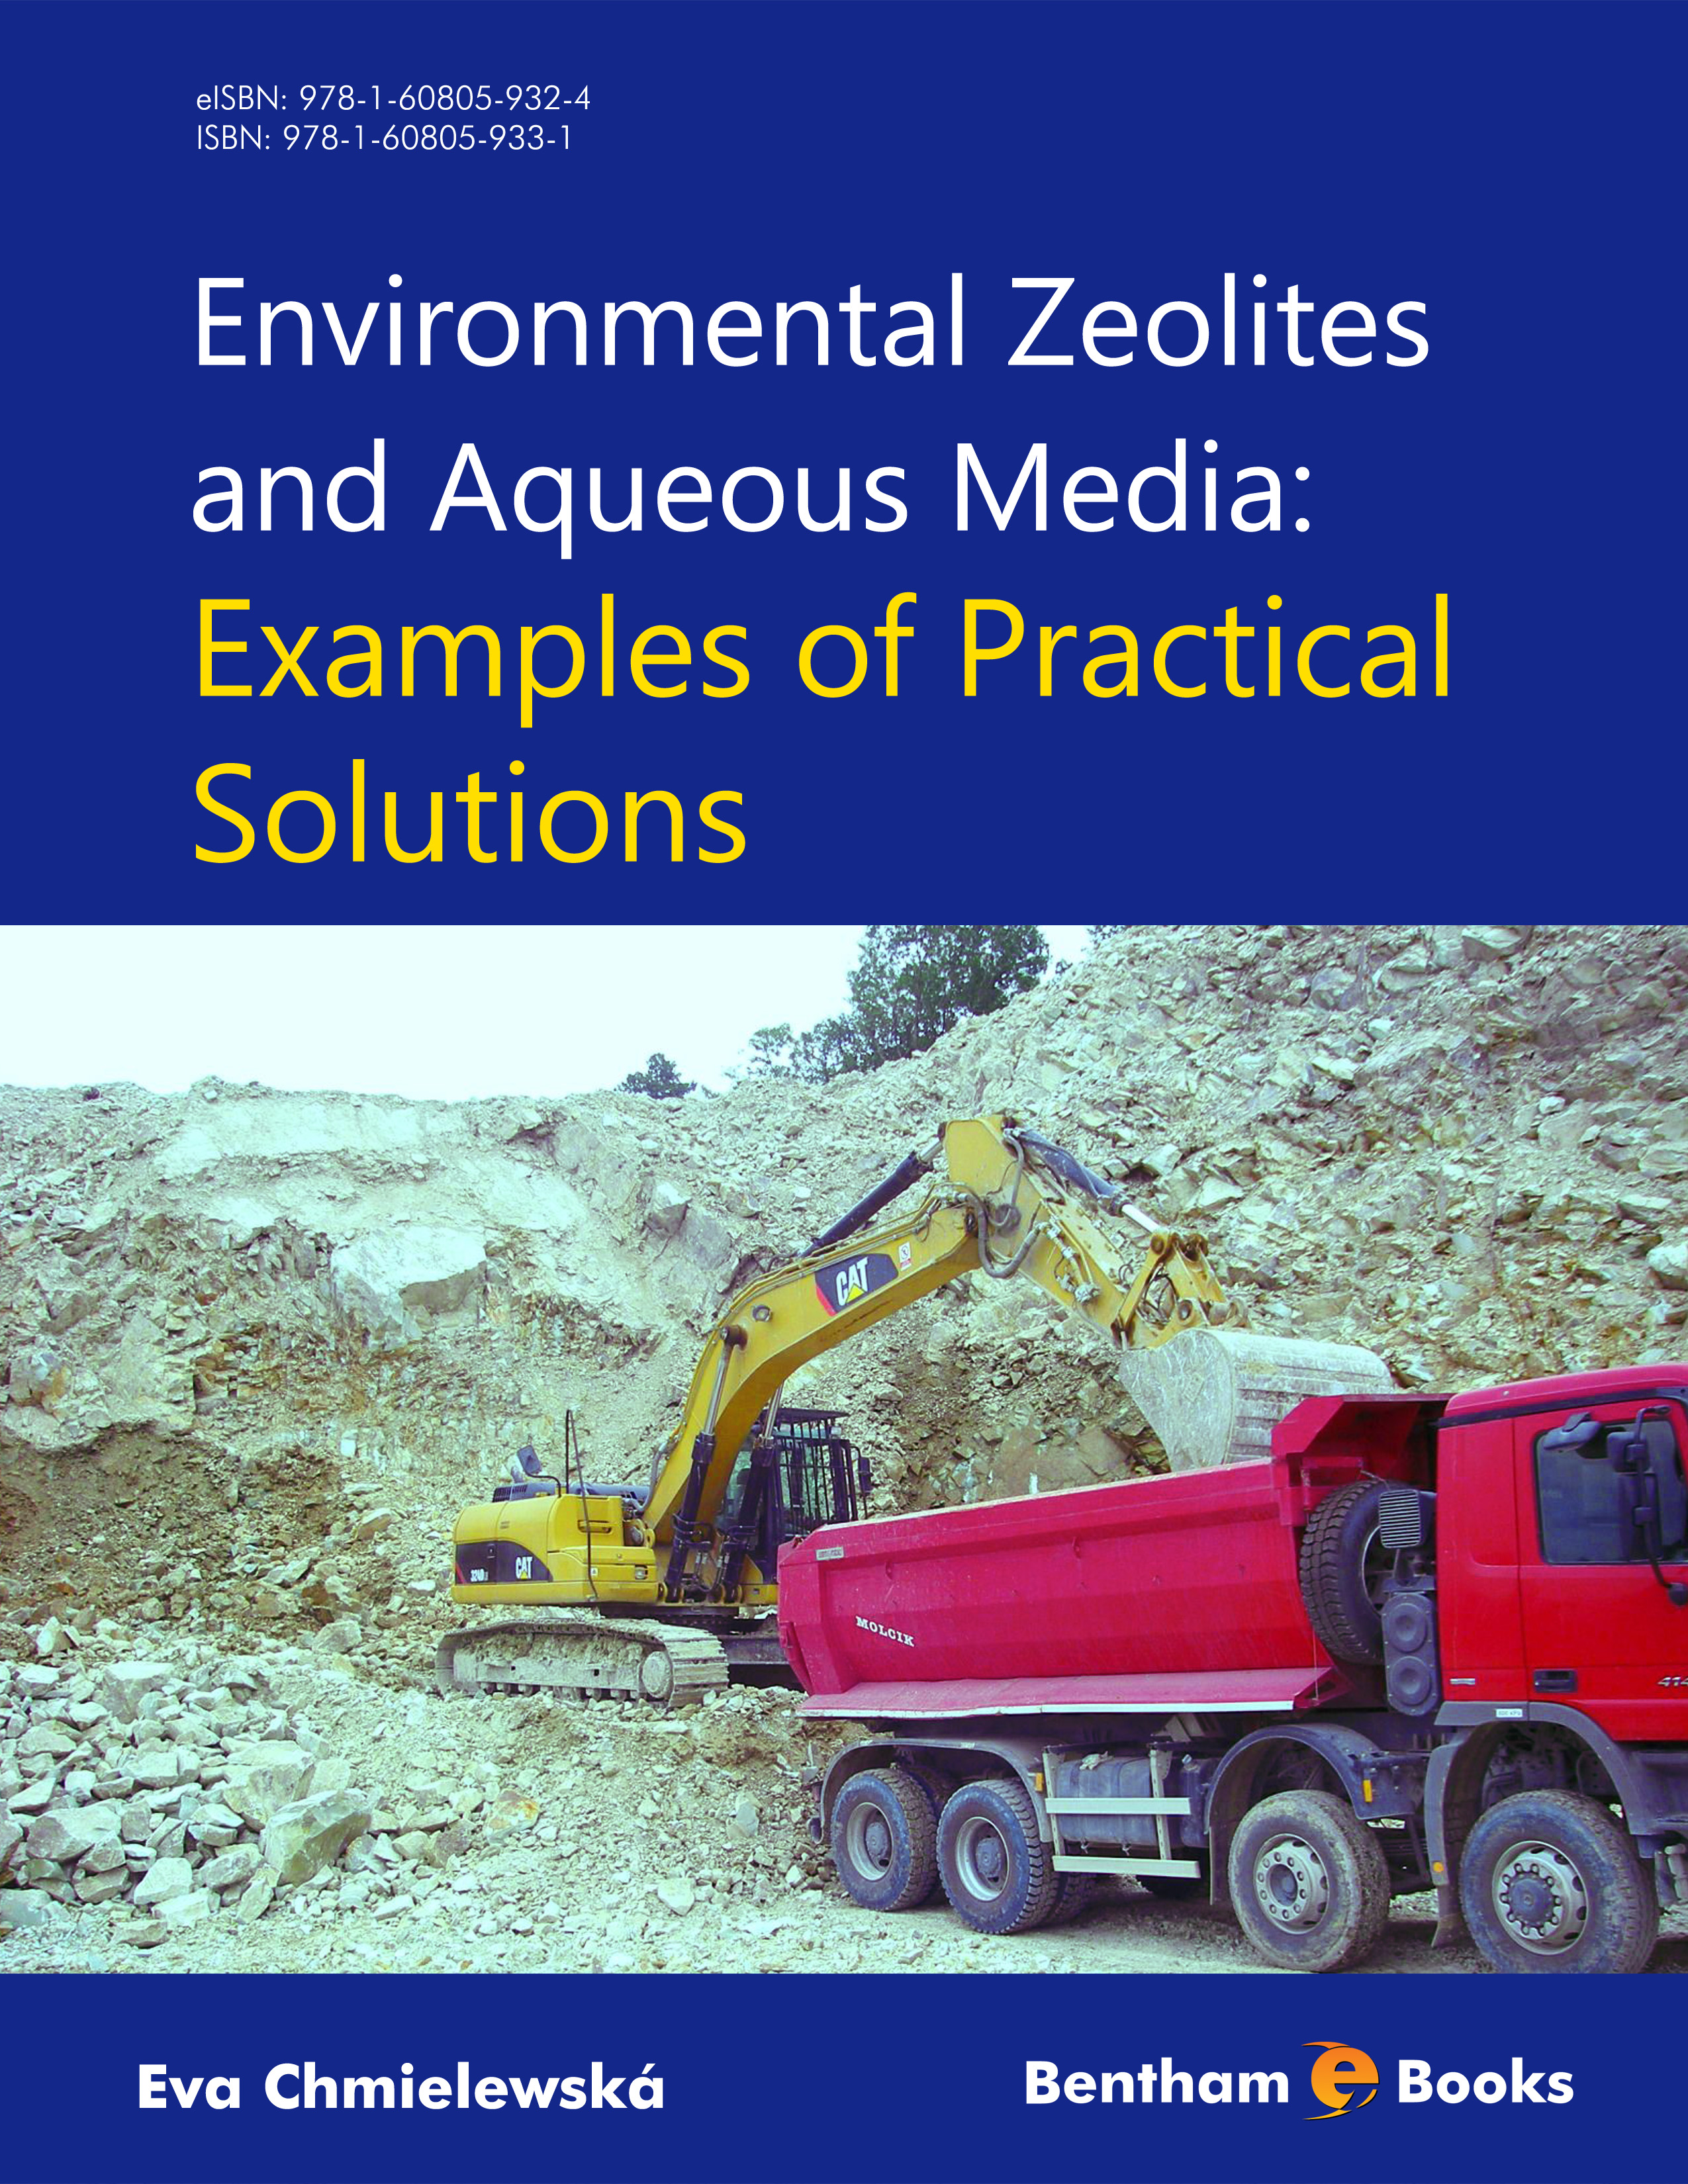 Environmental Zeolites and Aqueous Media: Examples of Practical Solutions